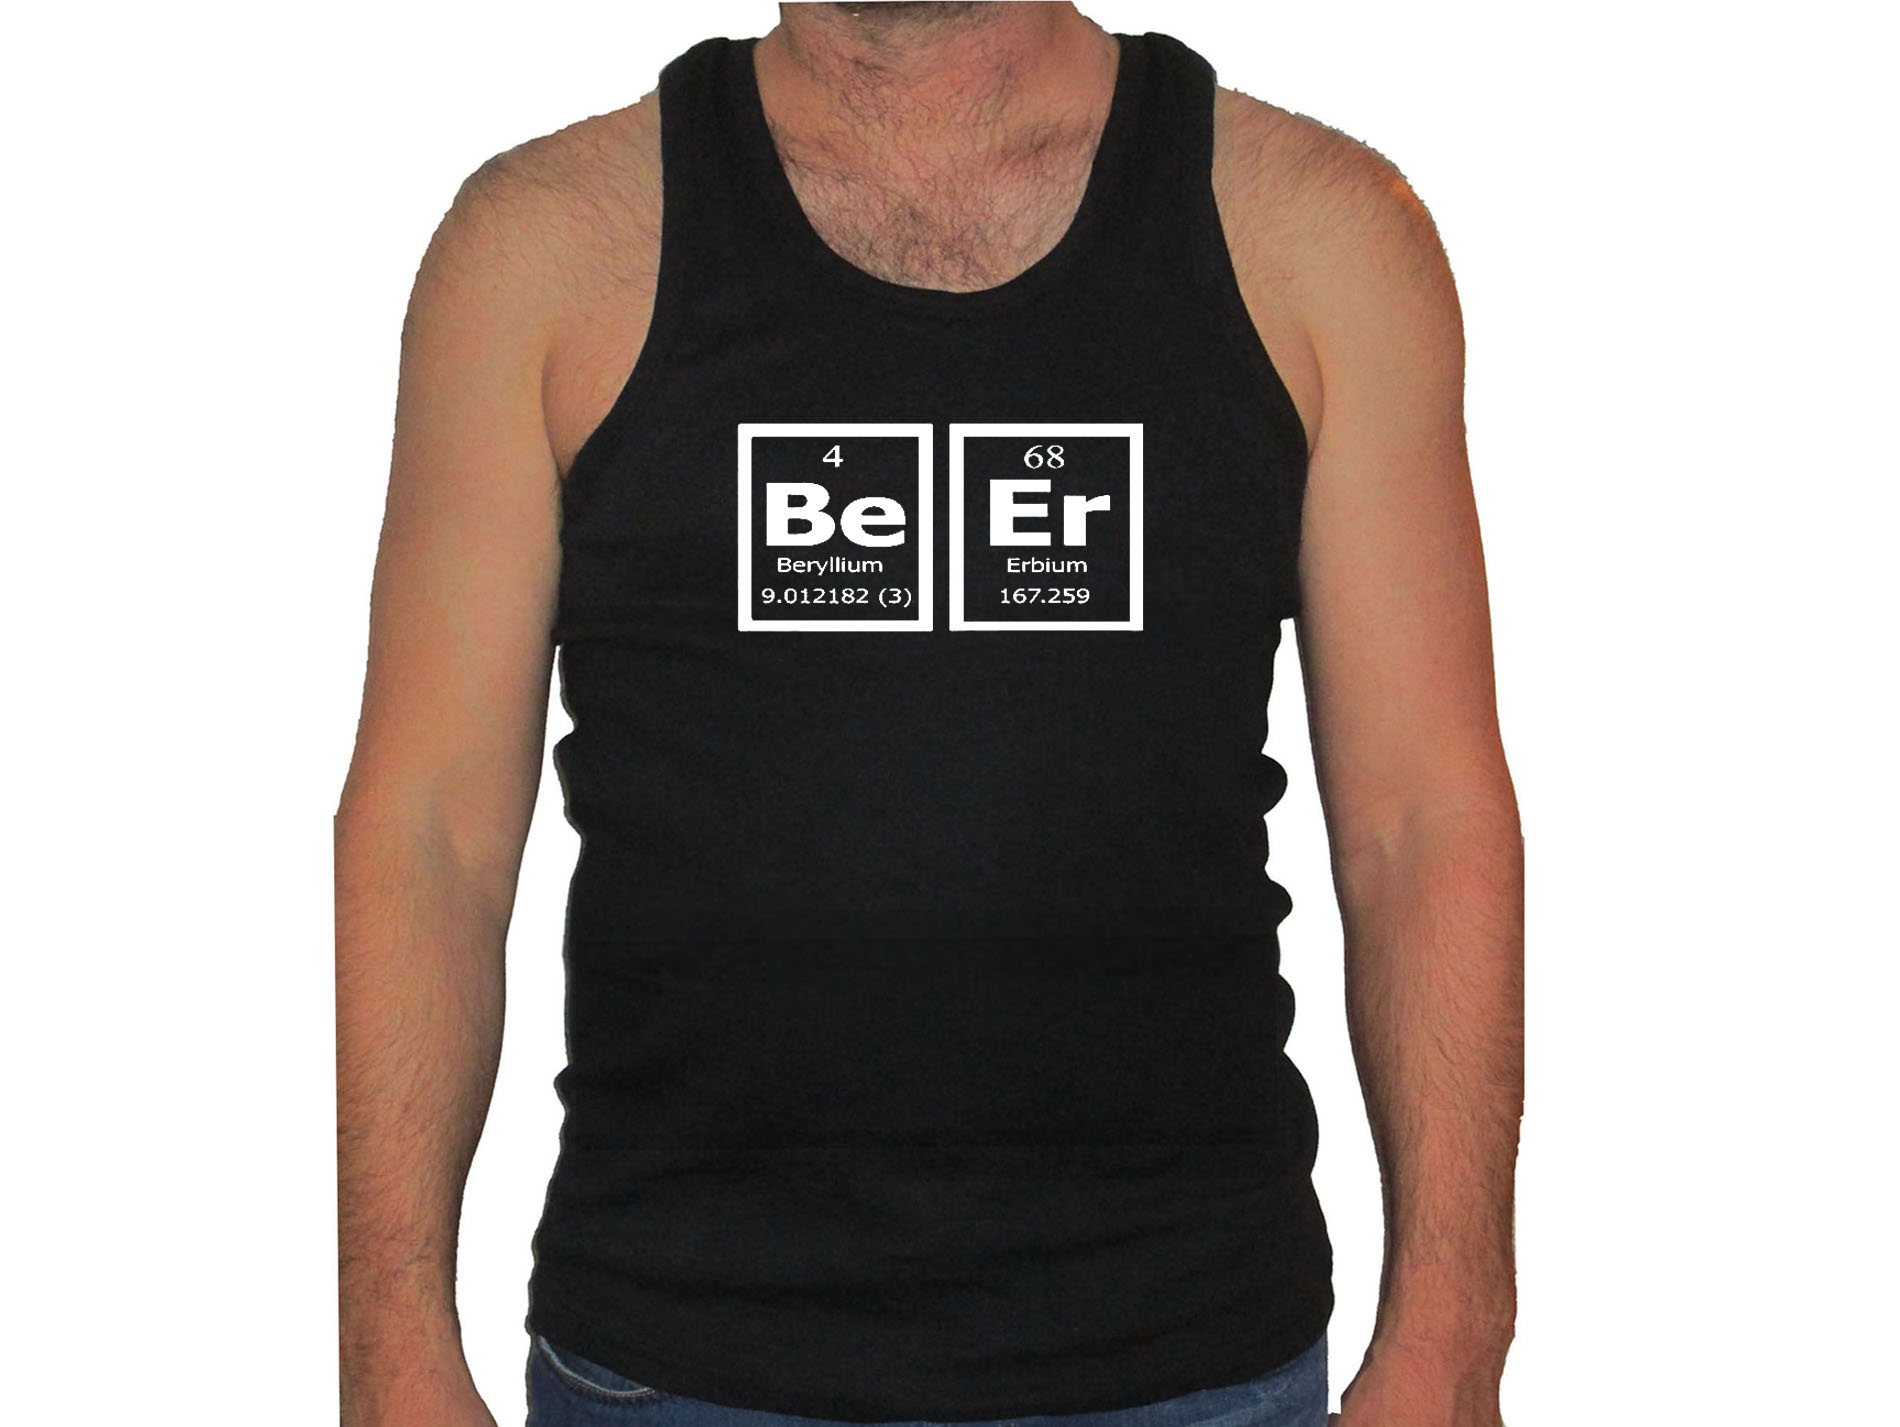 Beer periodic table funny drinking tank top